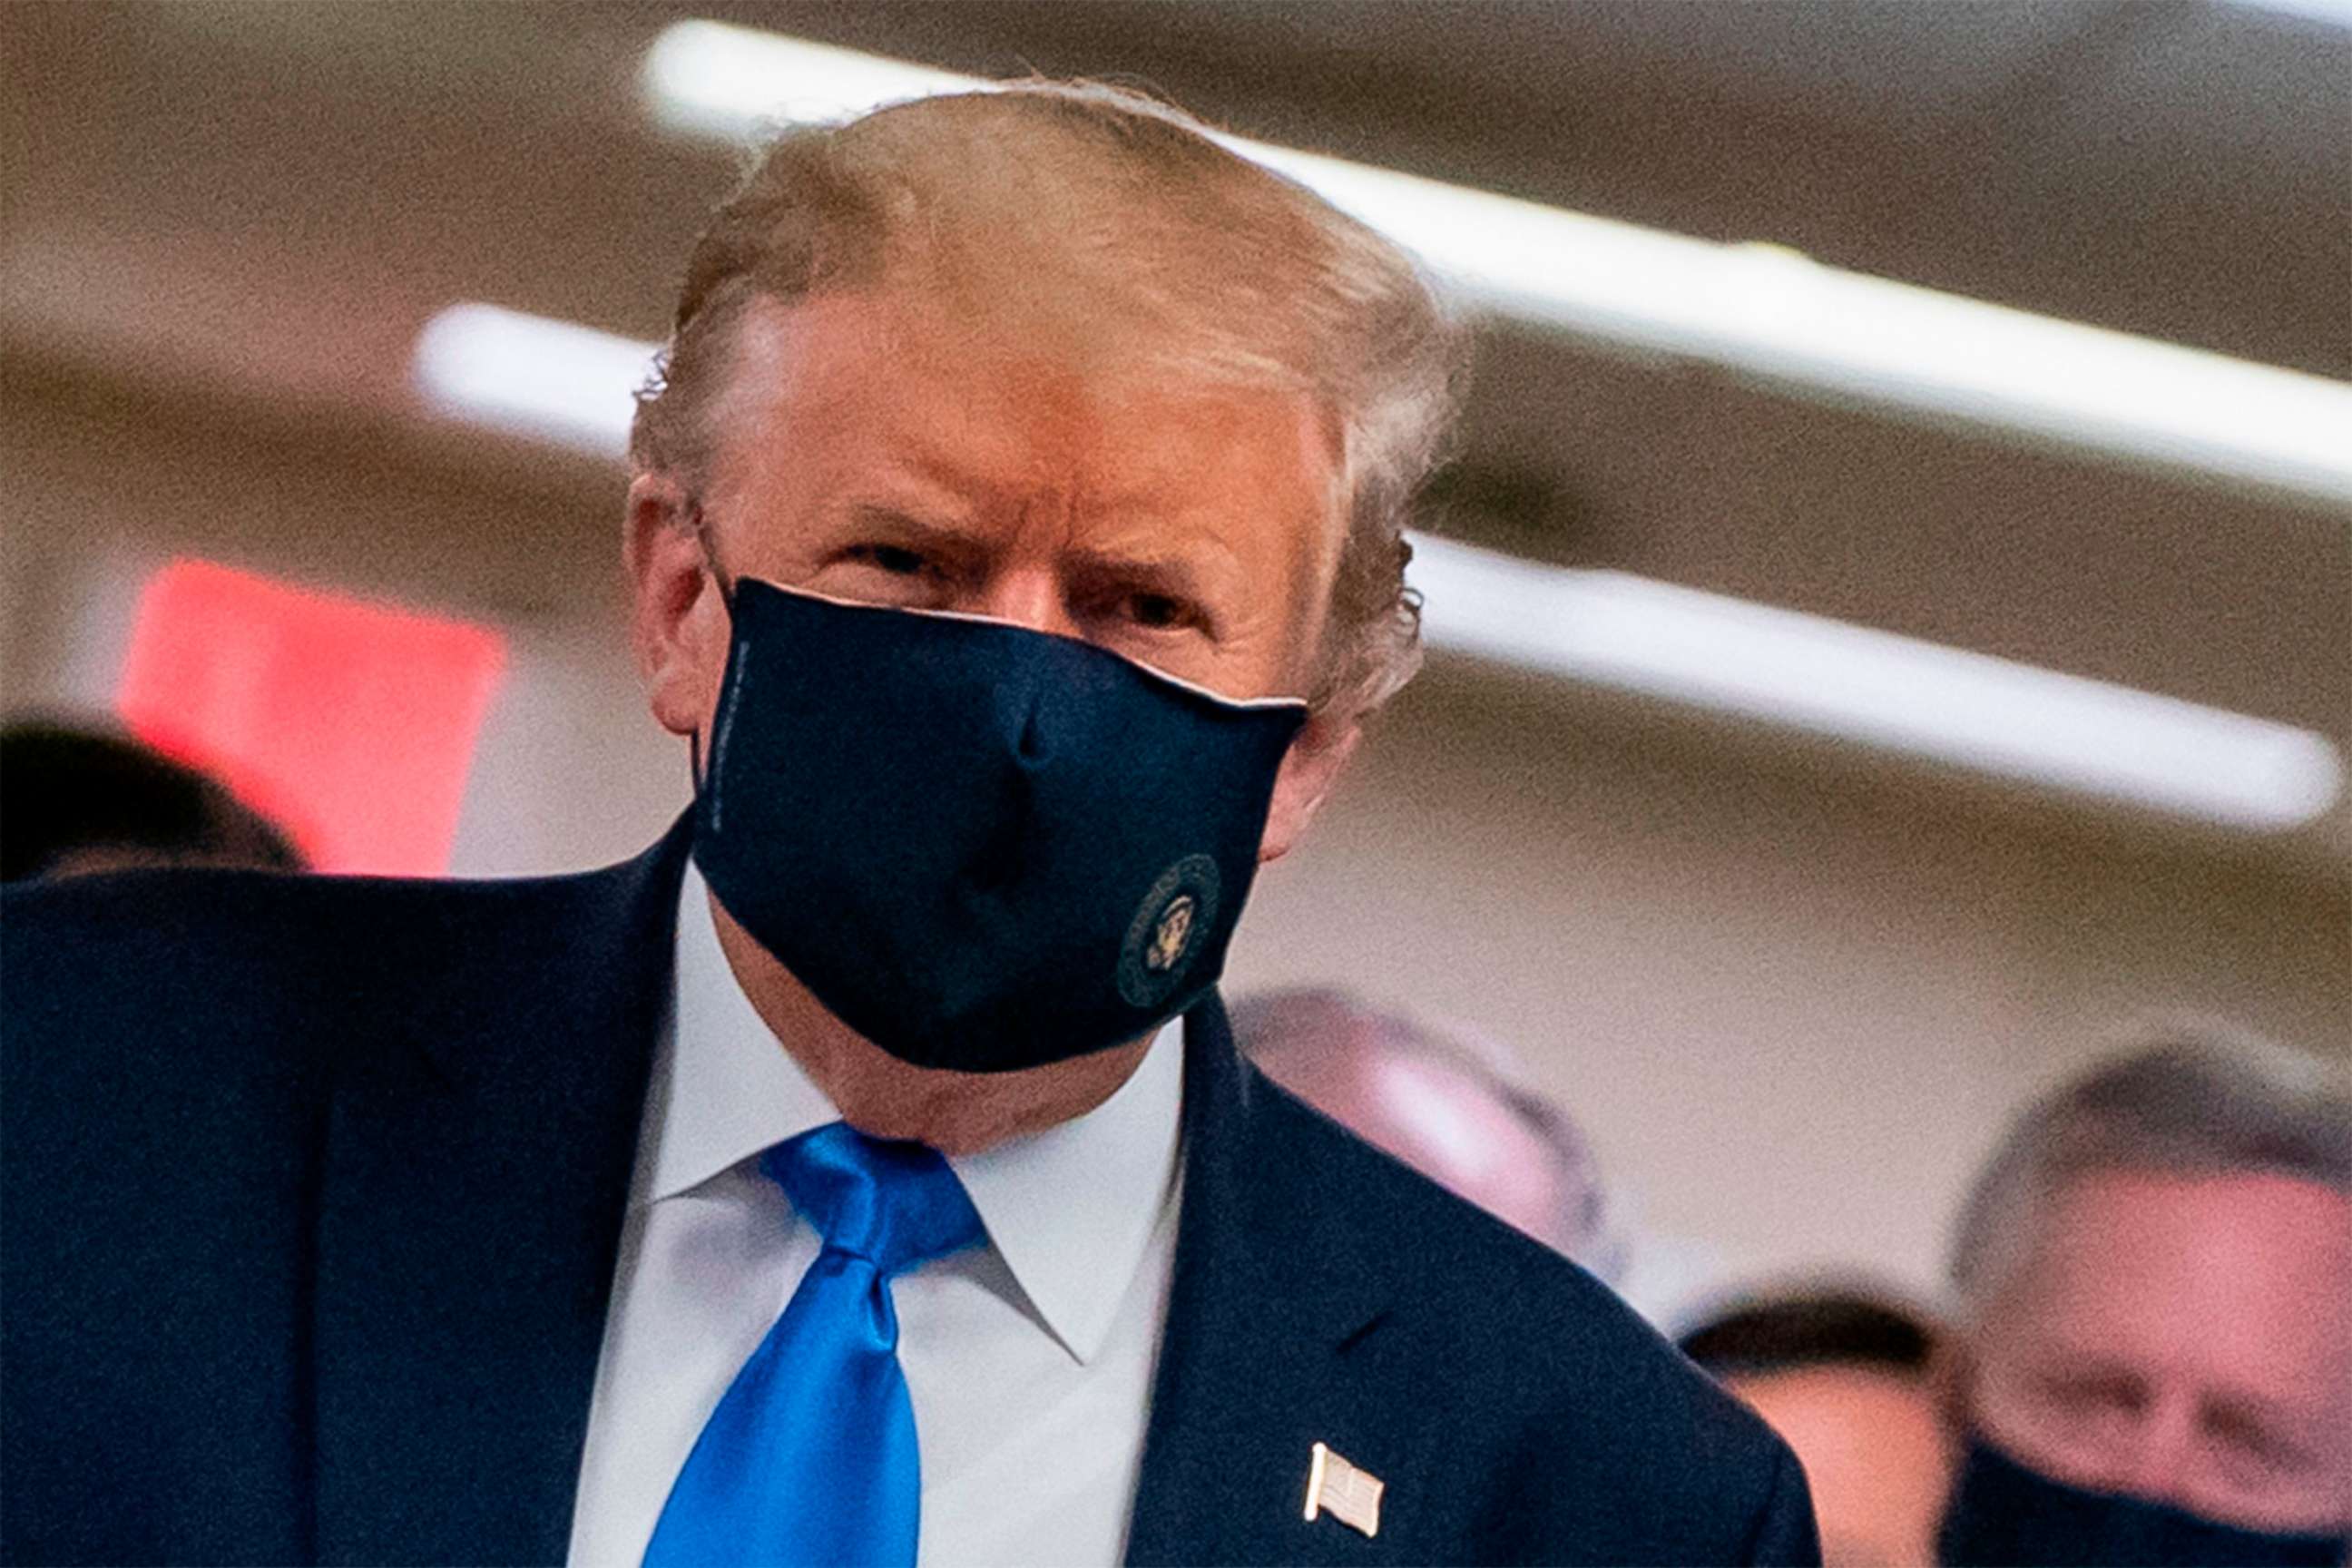 PHOTO: US President Donald Trump wears a mask as he visits Walter Reed National Military Medical Center in Bethesda, Maryland' on July 11, 2020.